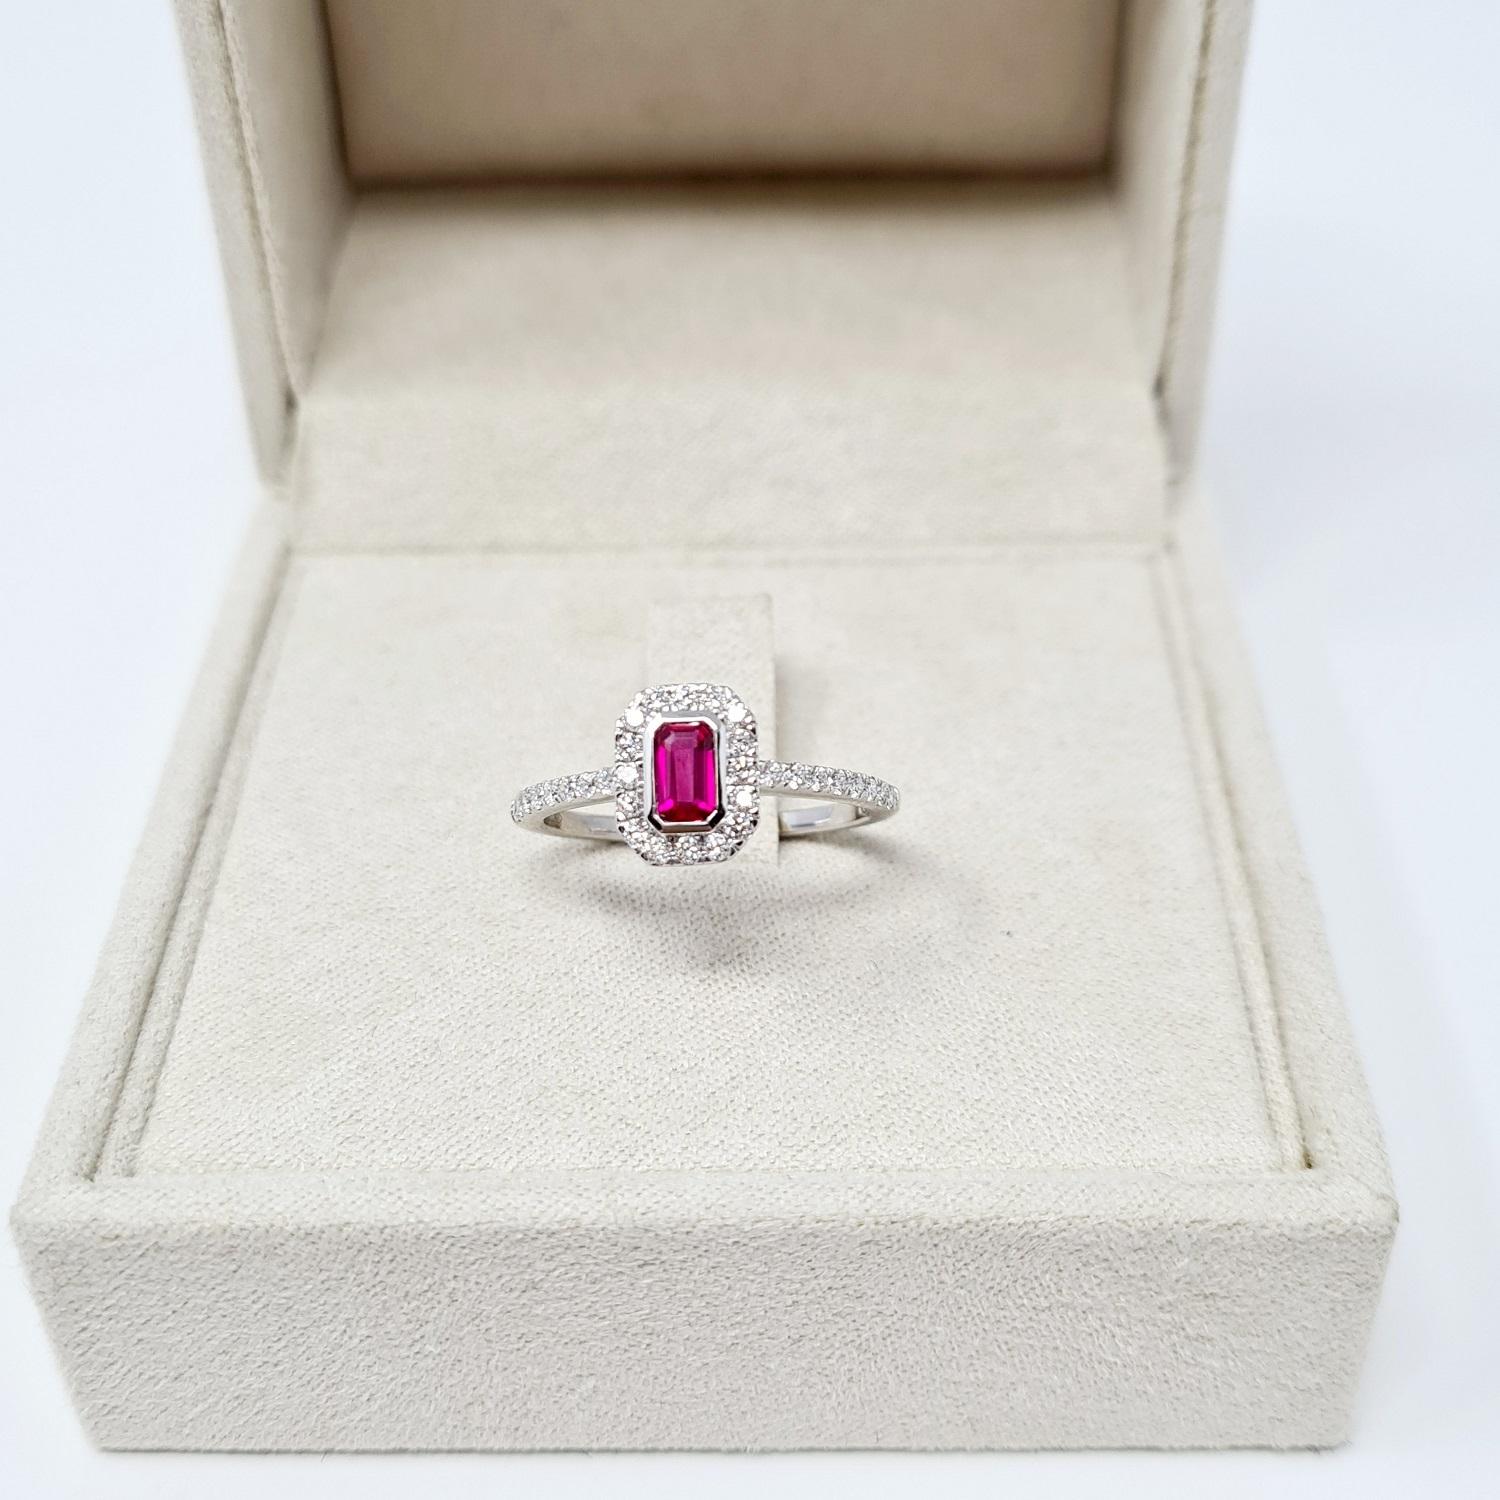 Beautiful modern engagement ring. New ring with tags. The ring consists of white gold with 0.28 Ct ruby and 0.31 Ct diamonds round cut.
Total weight: 2.56 grams
Metal: white gold 18Kt
New contemporary jewelry. 
US Ring size 7 please see the